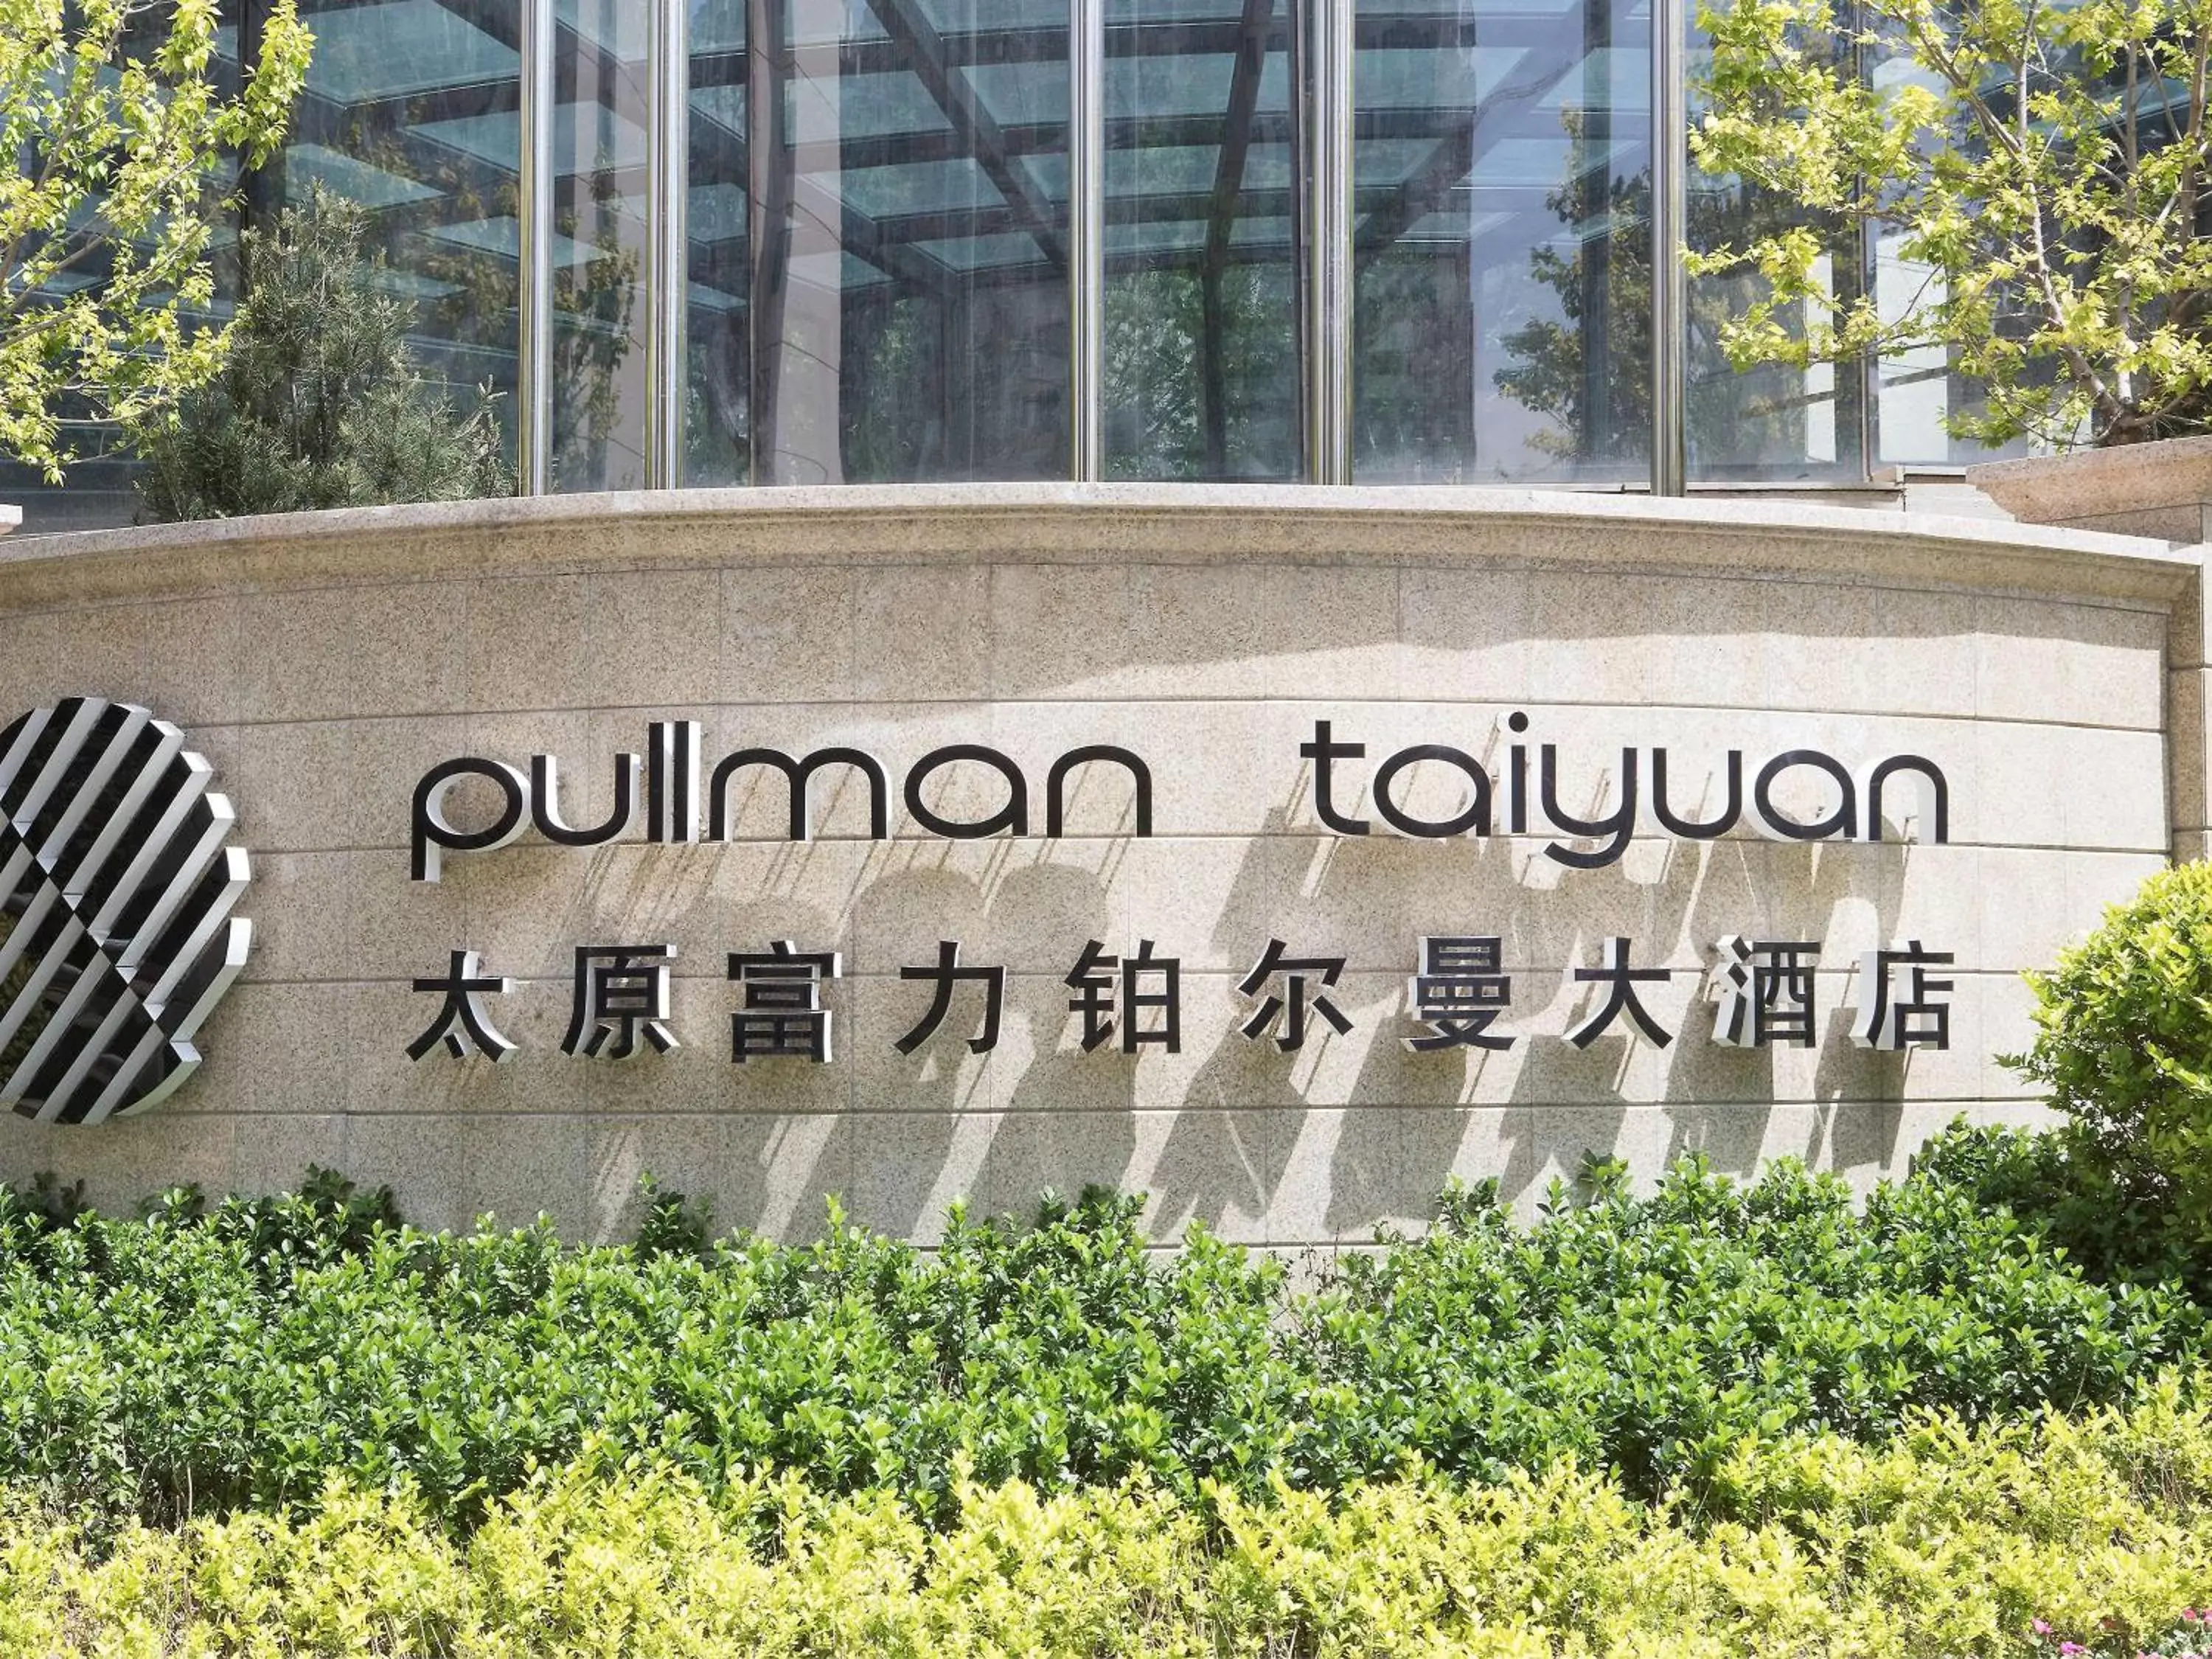 Property building in Pullman Taiyuan